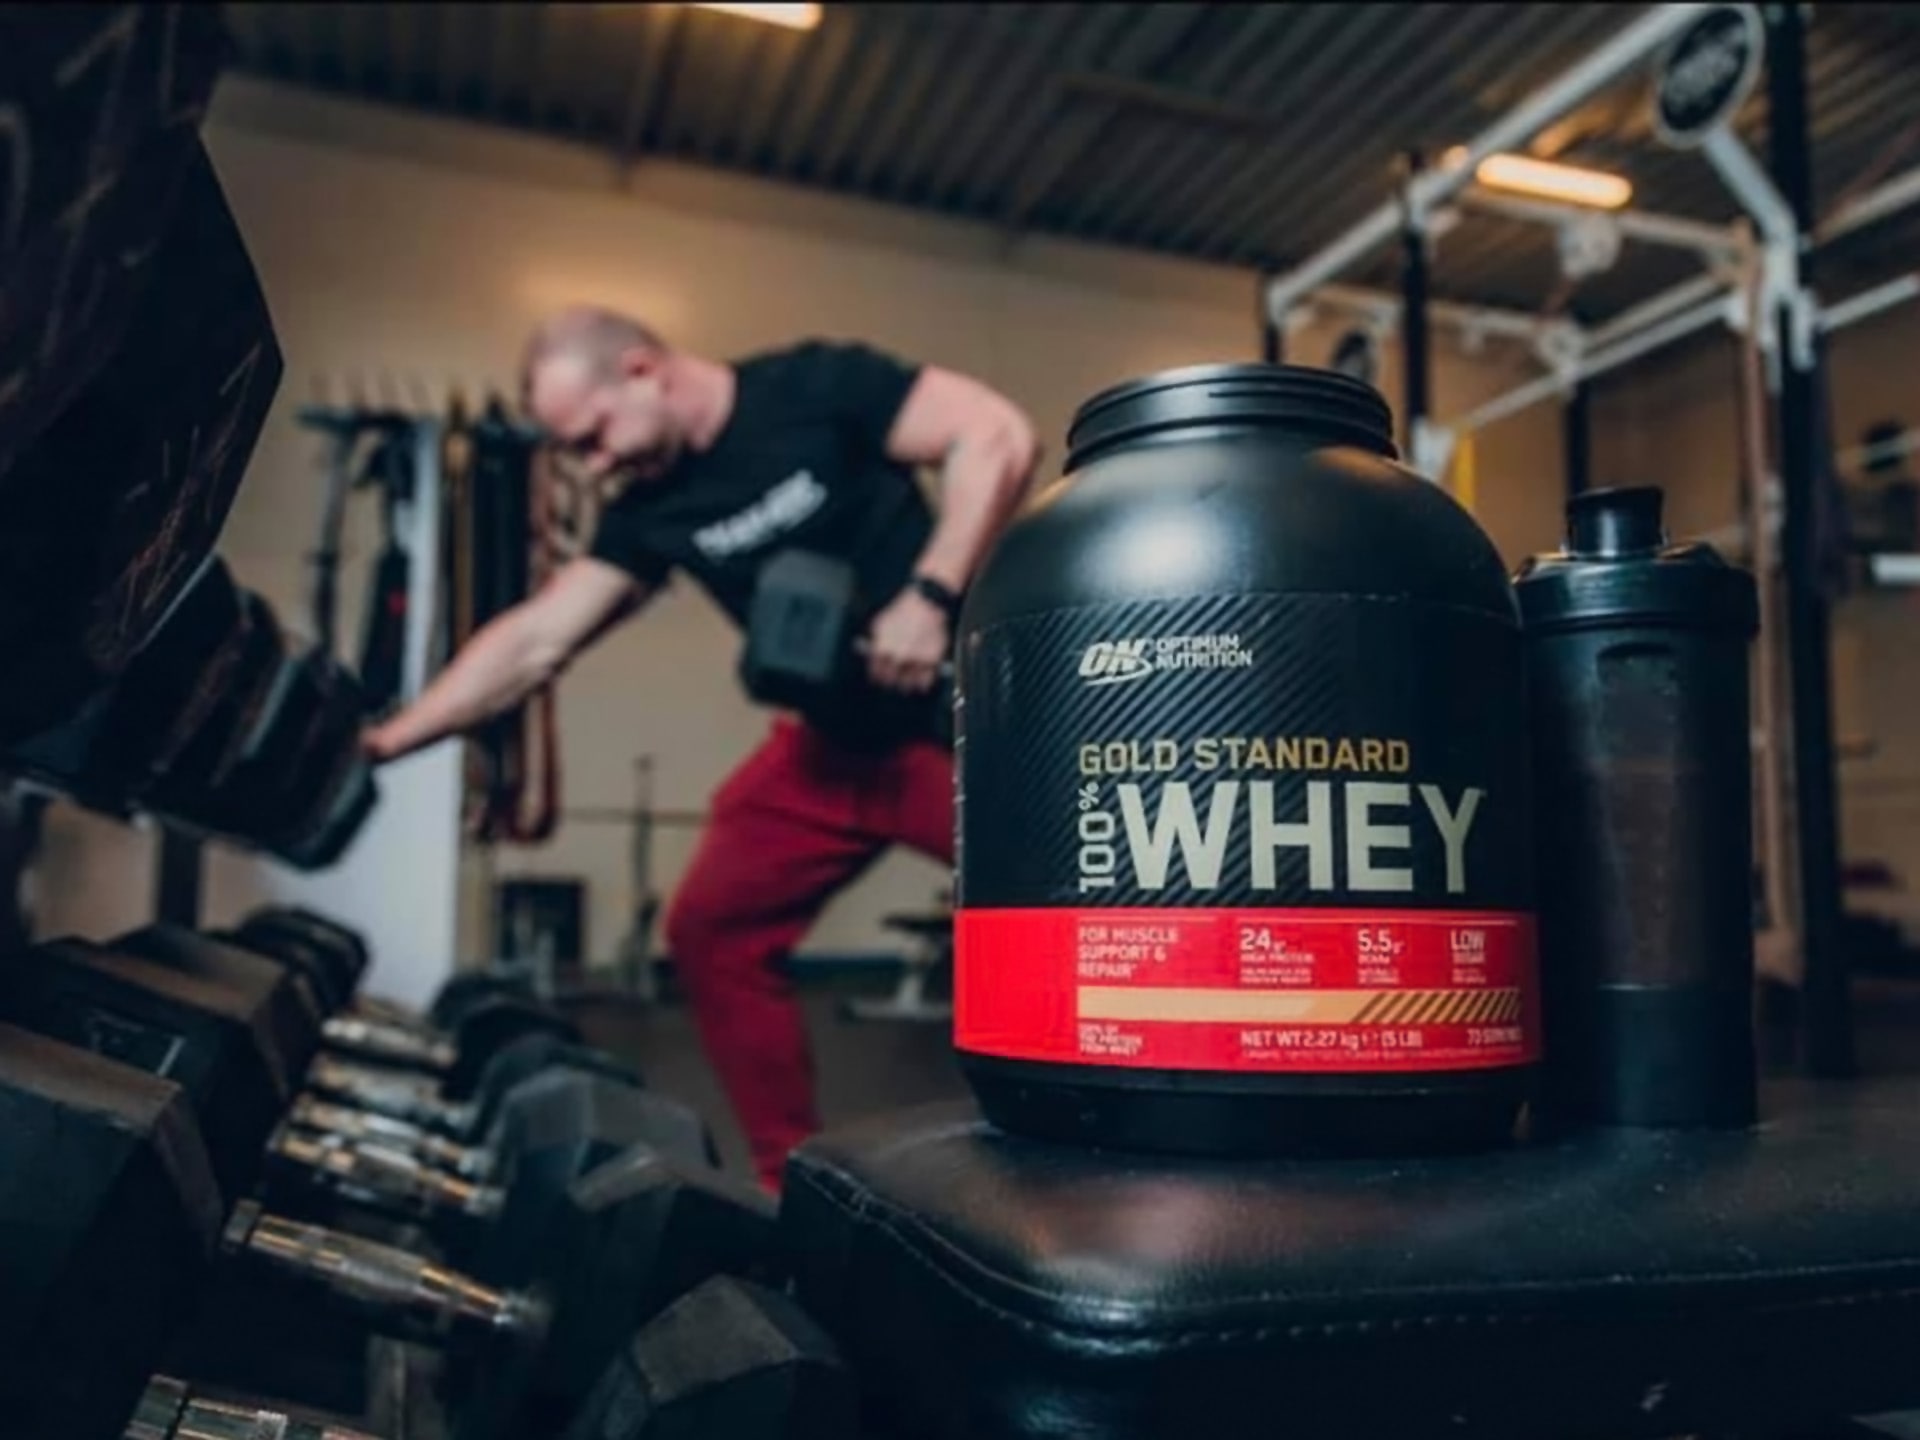 ON - 100% Whey Gold Standard